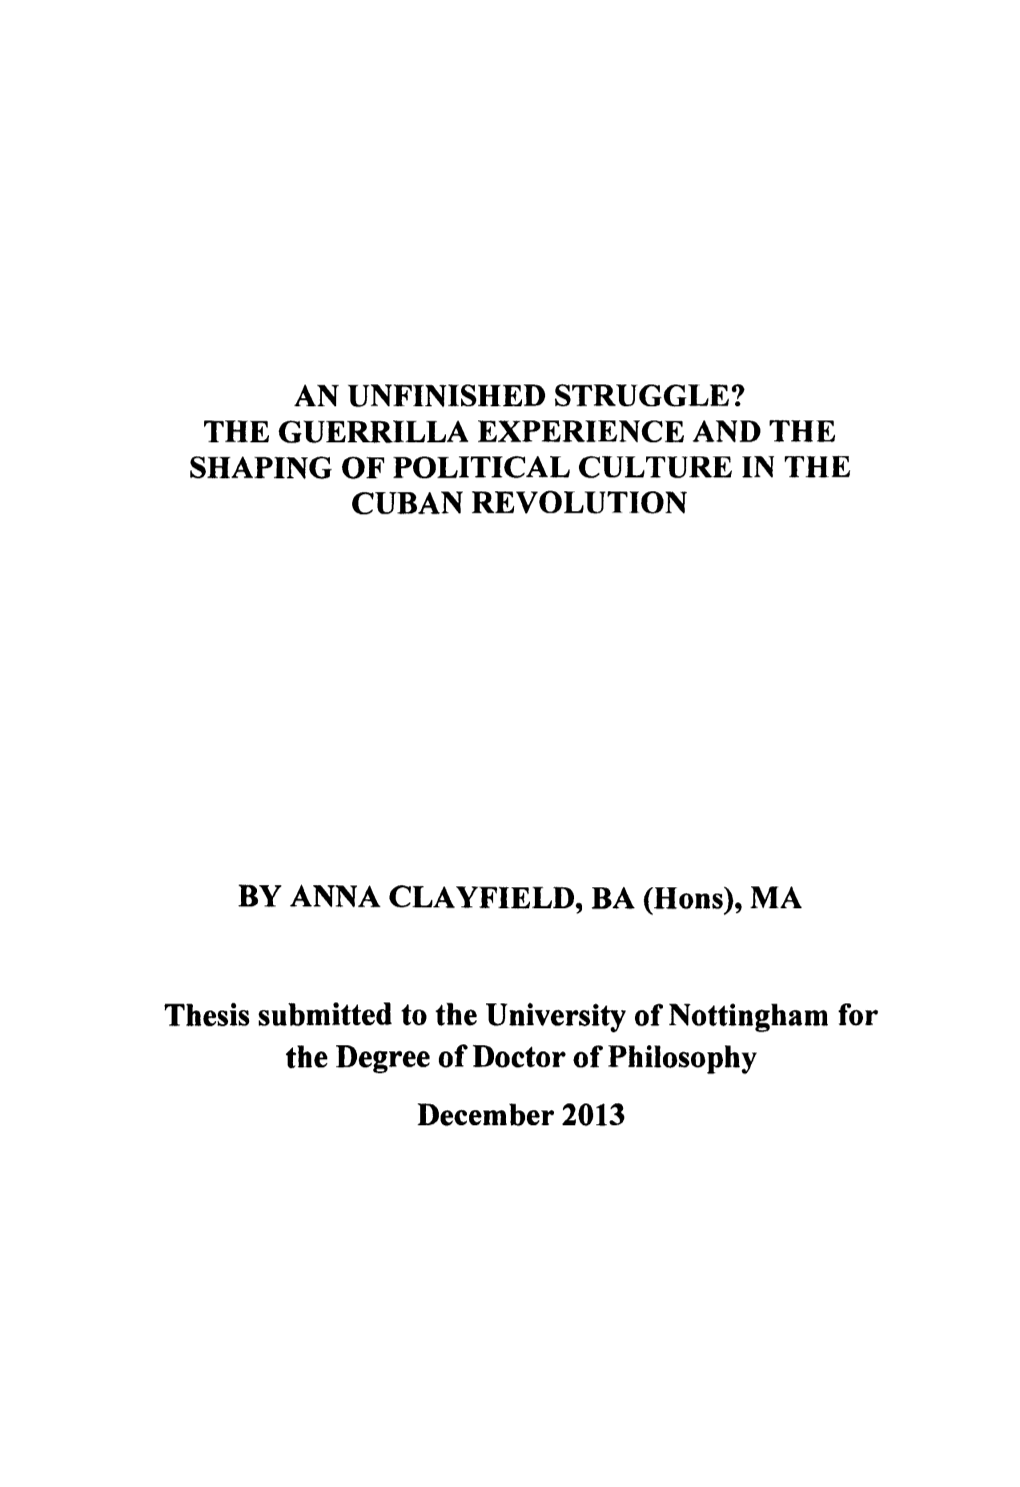 An Unfinished Struggle? the Guerrilla Experience and the Shaping of Political Culture in the Cuban Revolution